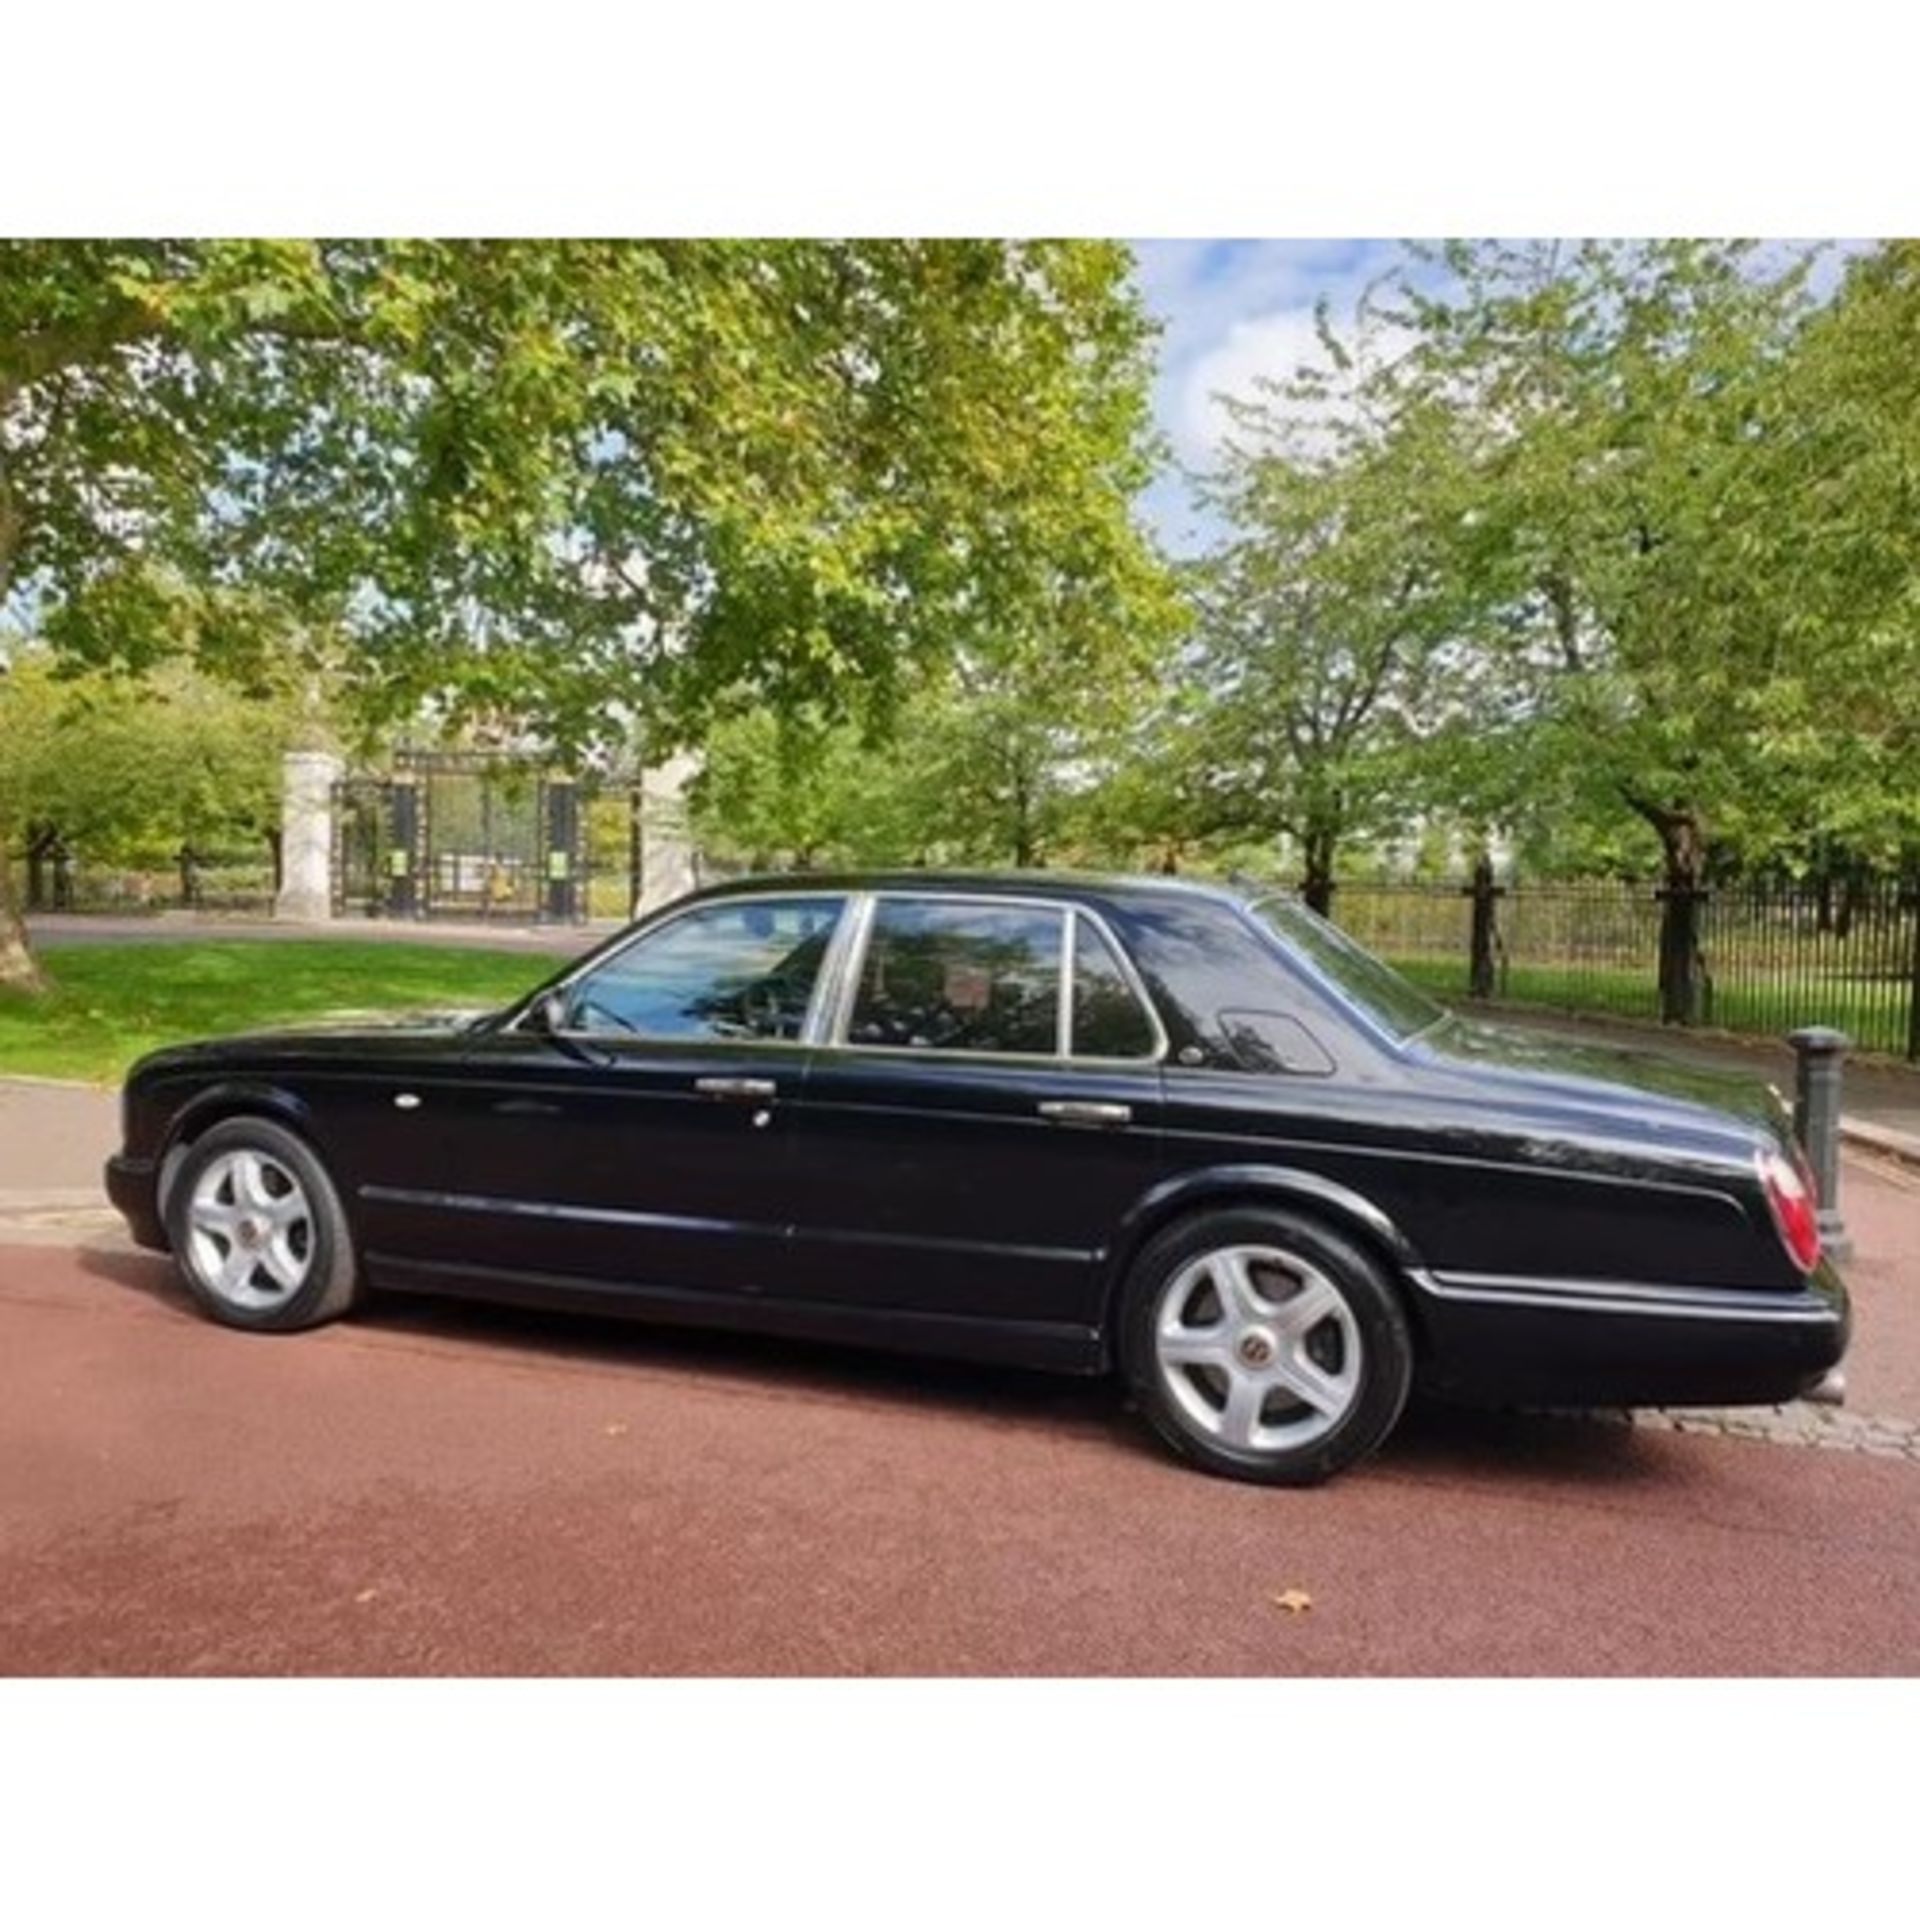 CELEBRATE THE CORONATION WITH A BENTLEY ARNAGE – FIT FOR A KING Bentley Arnage R, 6750cc V8